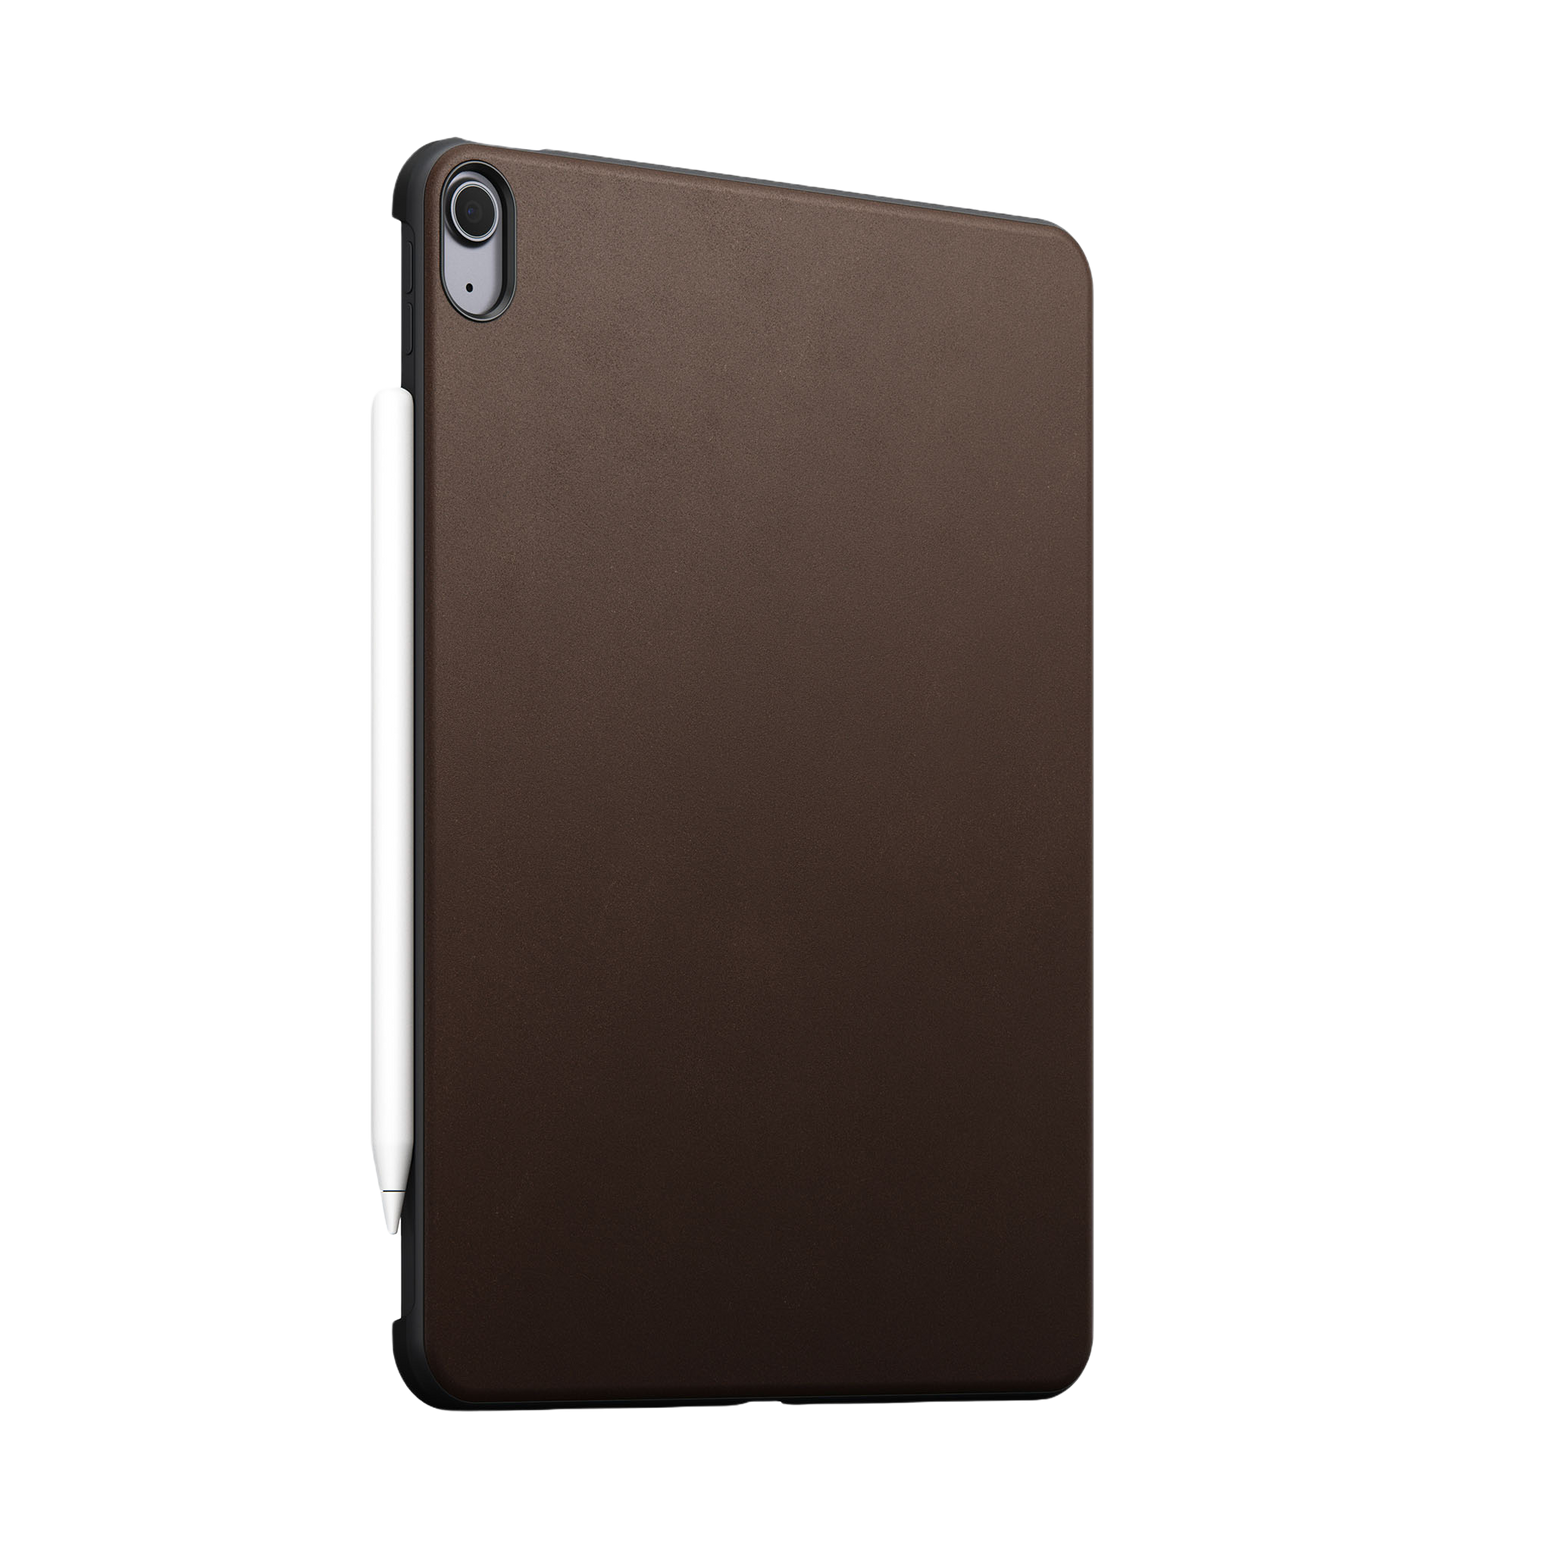 Nomad Modern Leather Case for iPad Air (4th Gen) - Rustic Brown